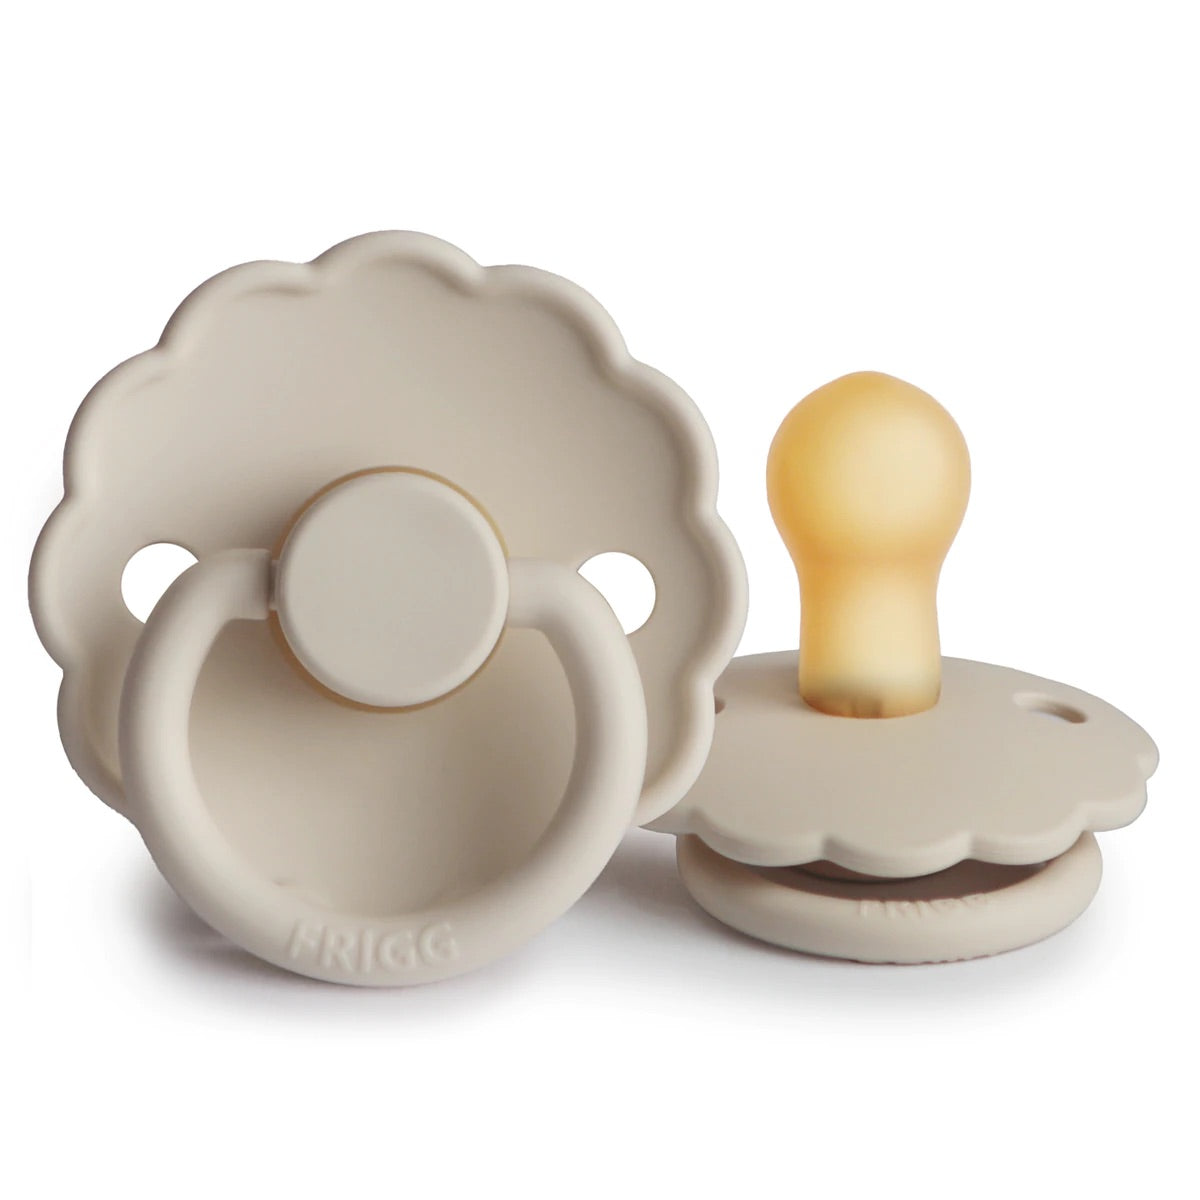 Mushie Frigg Daisy Natural Rubber Pacifier - Sandstone